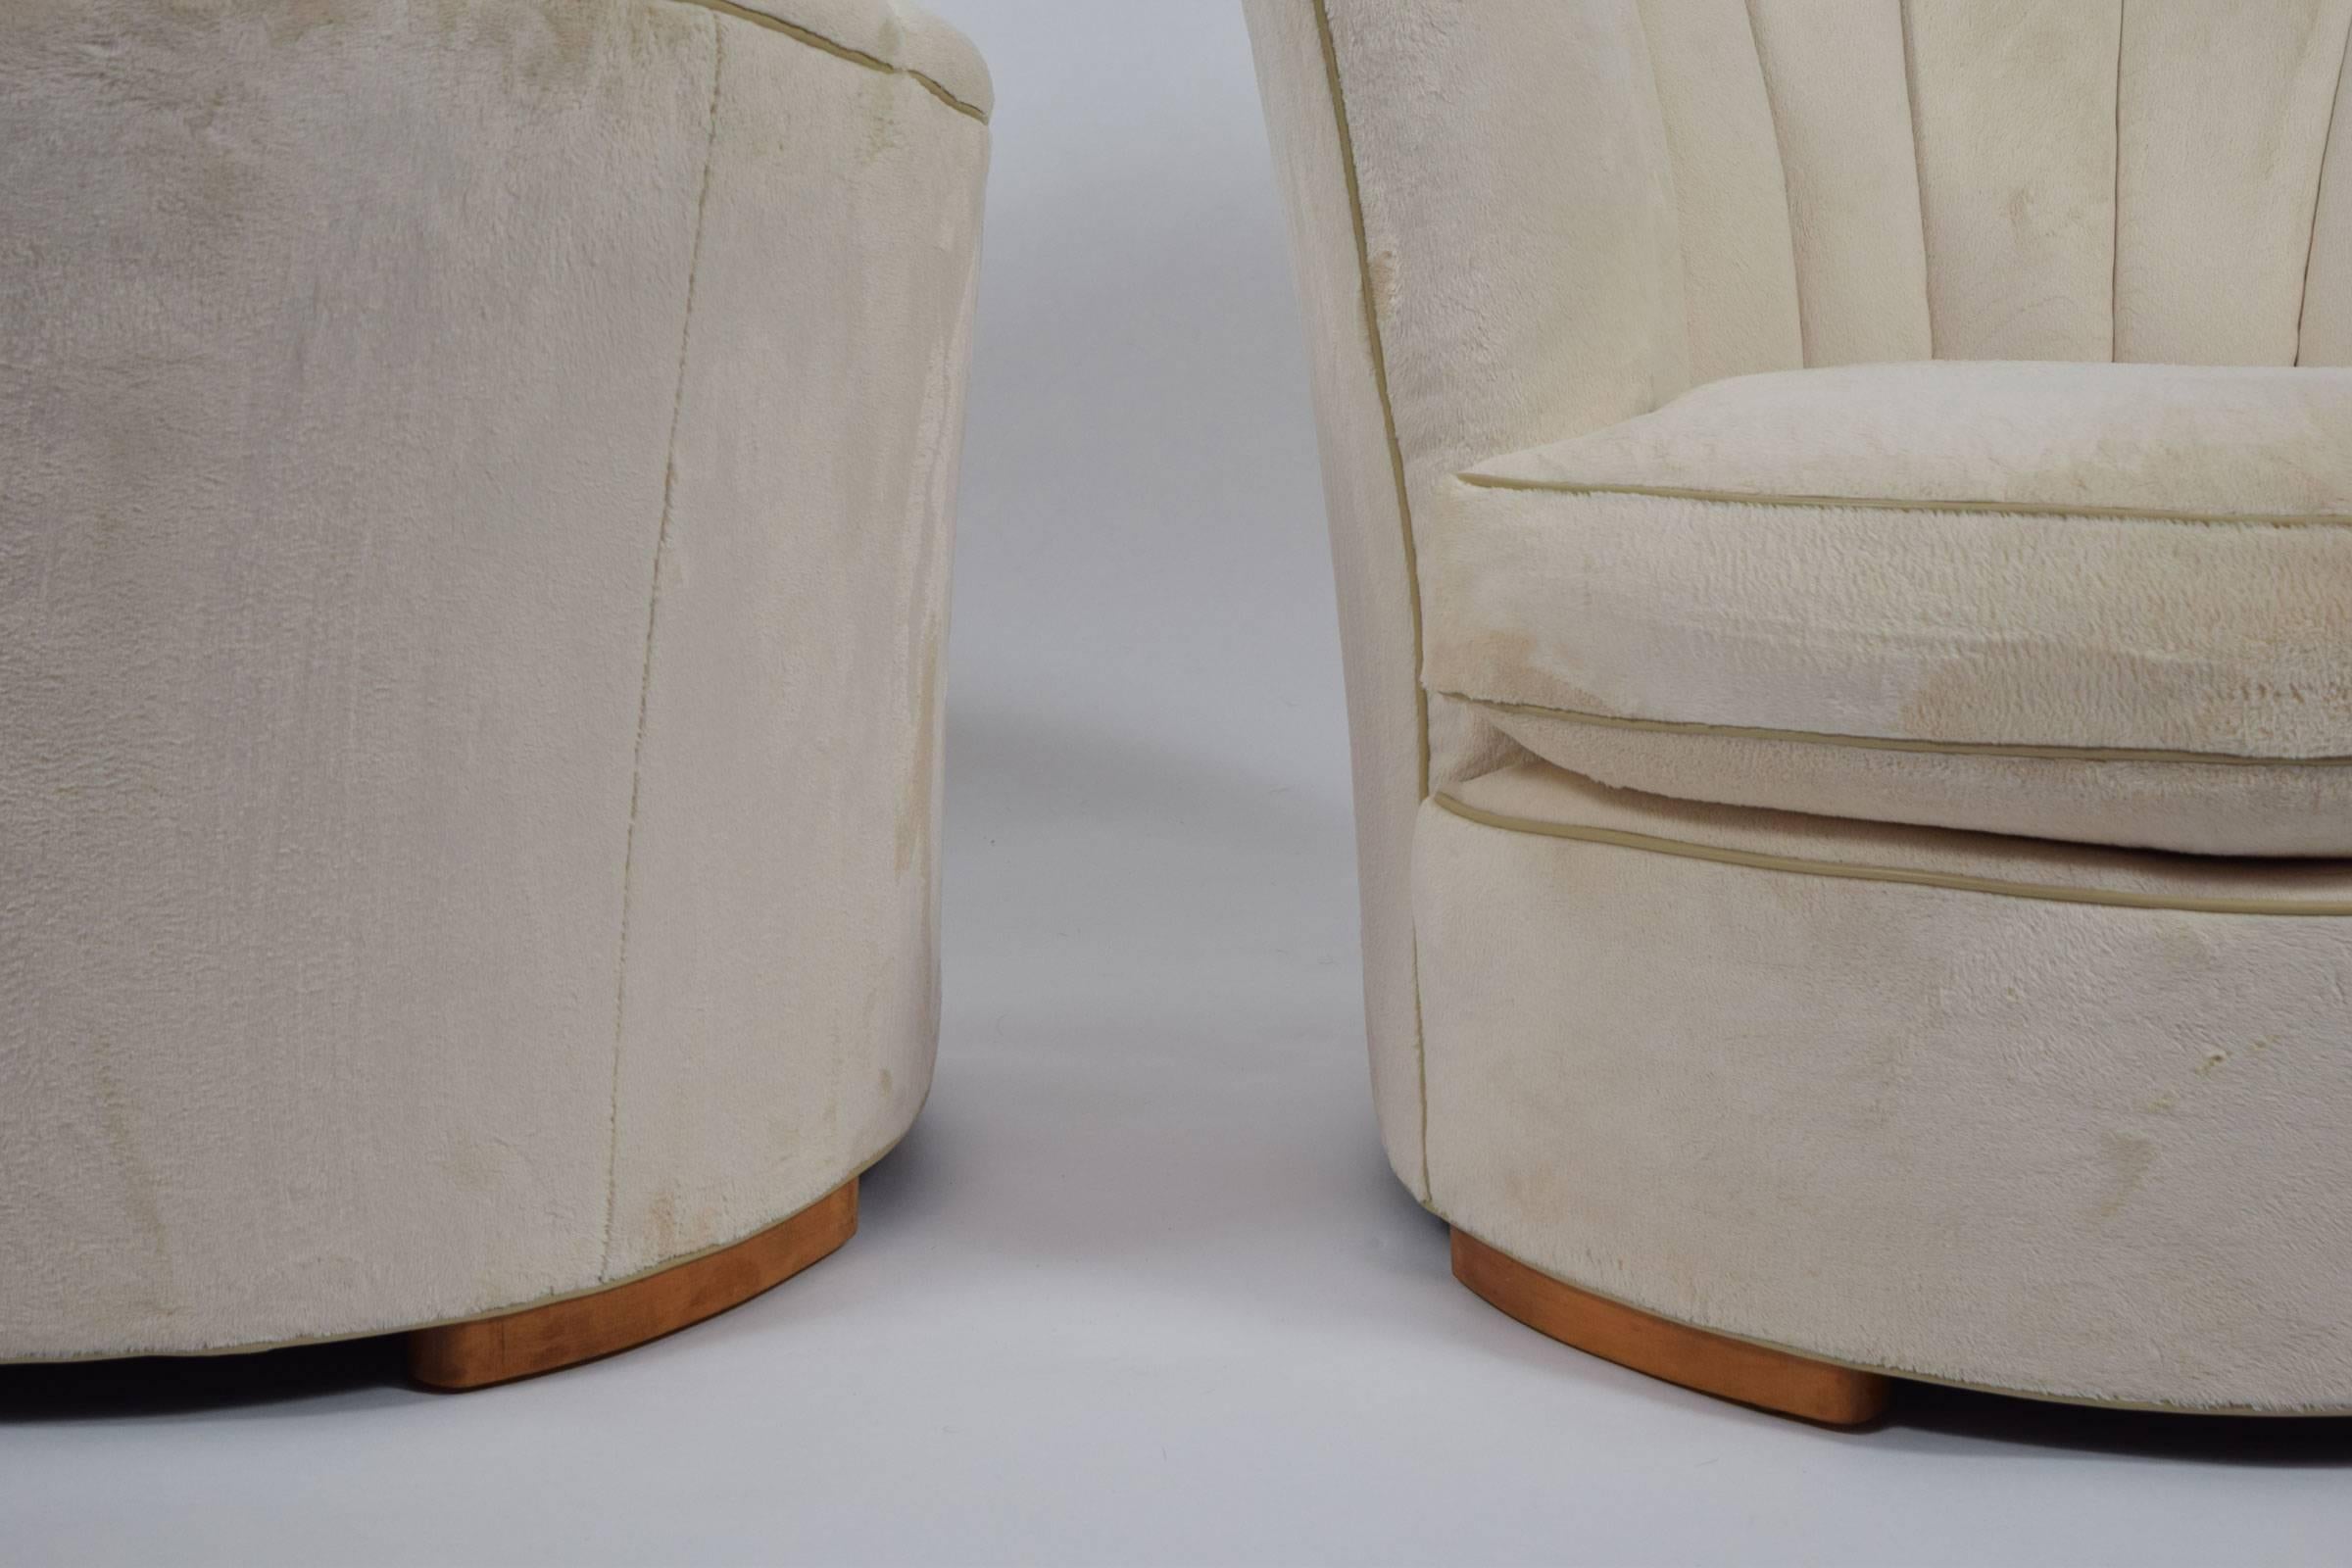 Pair of Deco Style Lounge Chairs with Fan Backs in Plush Velvety Fabric 2